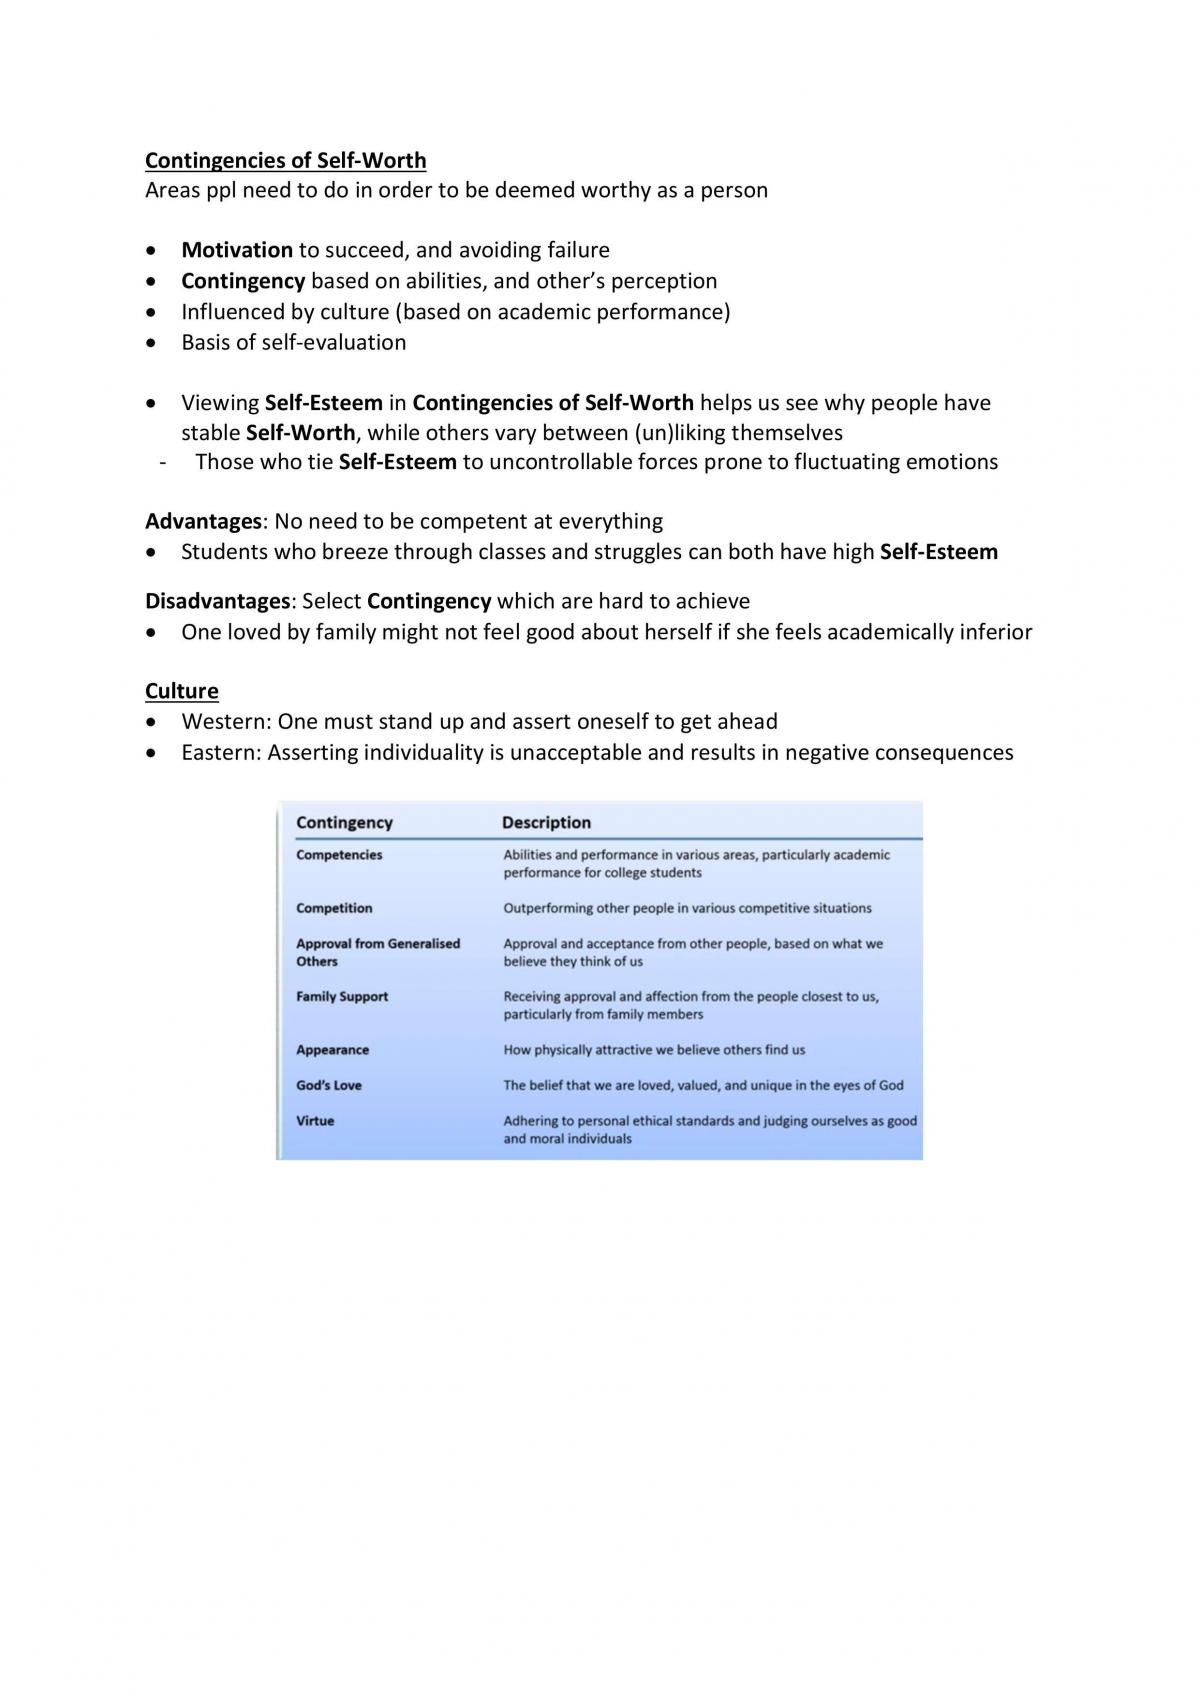 PSY259 - Personality And Individual Differences Notes - Page 30